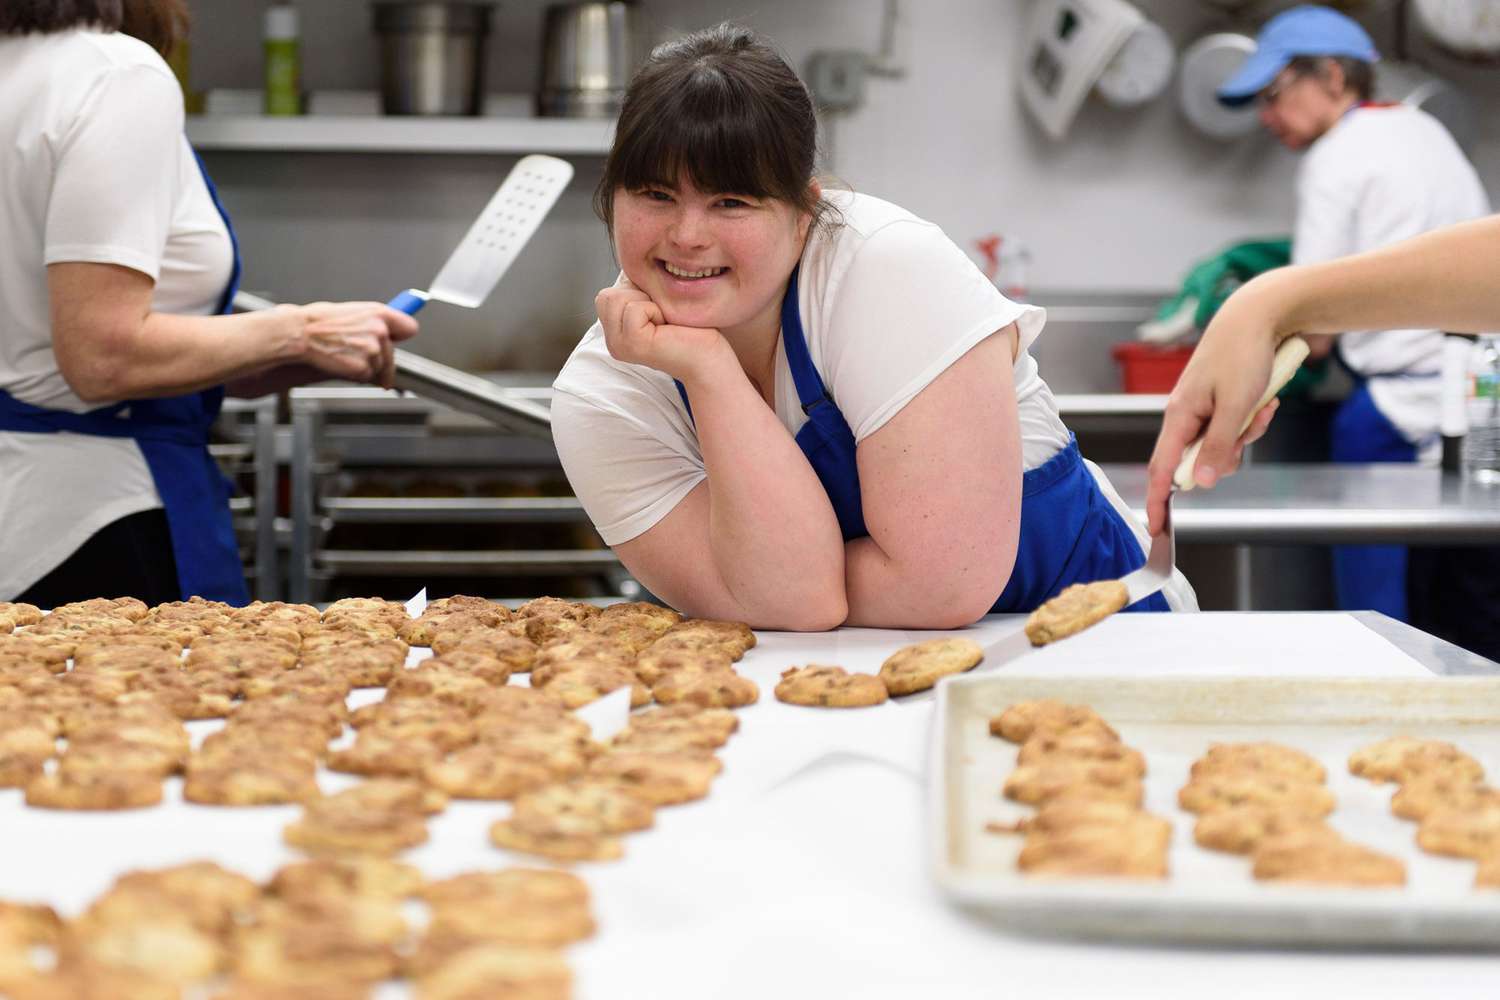 Collette Divitto, the owner of Collettey's Cookies